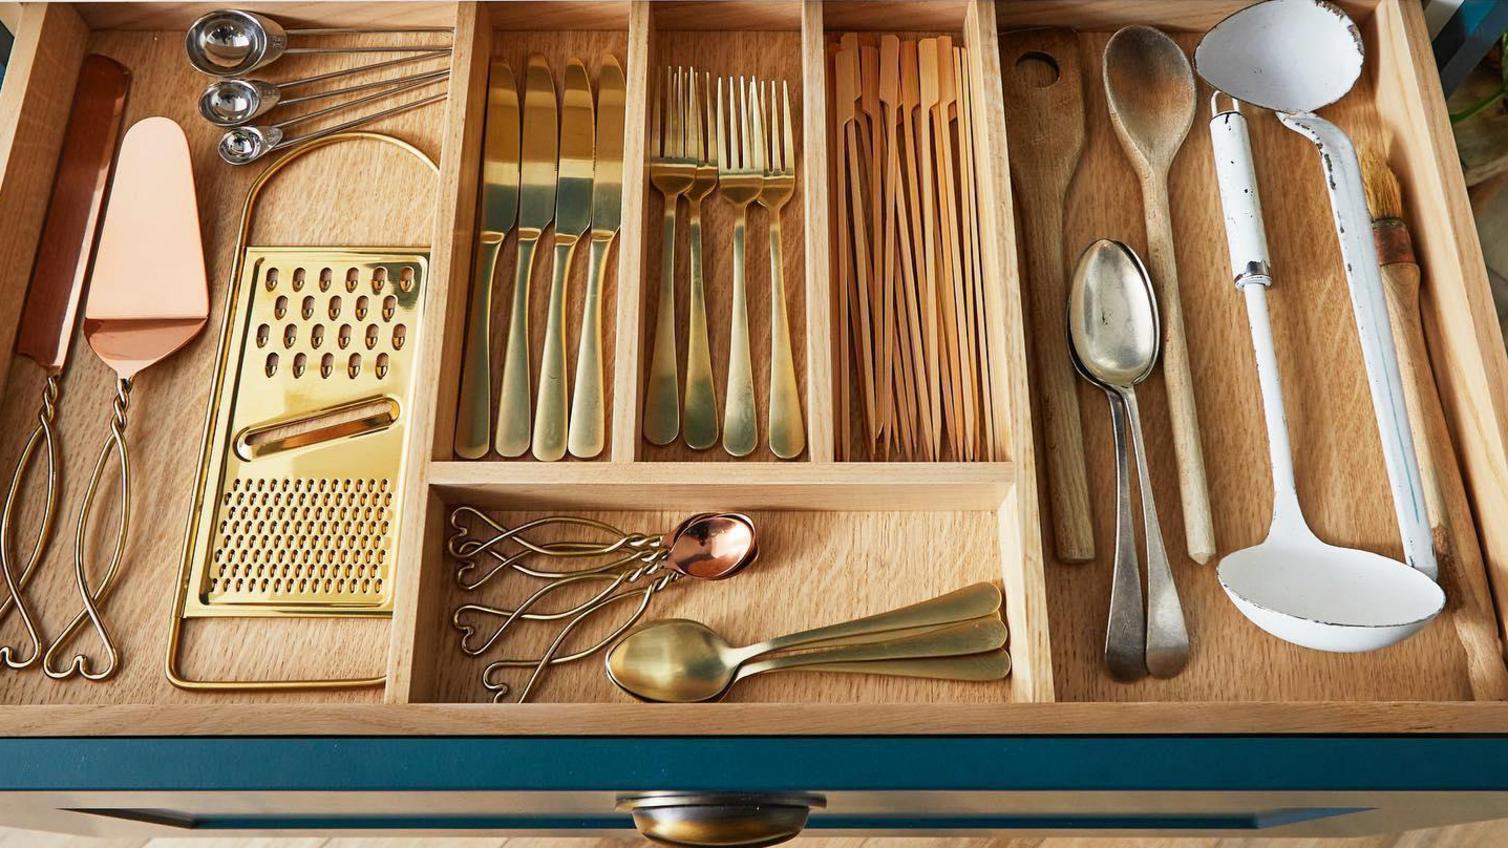 A wooden tray and nearly arranged cutlery inside a vibrant shaker drawer